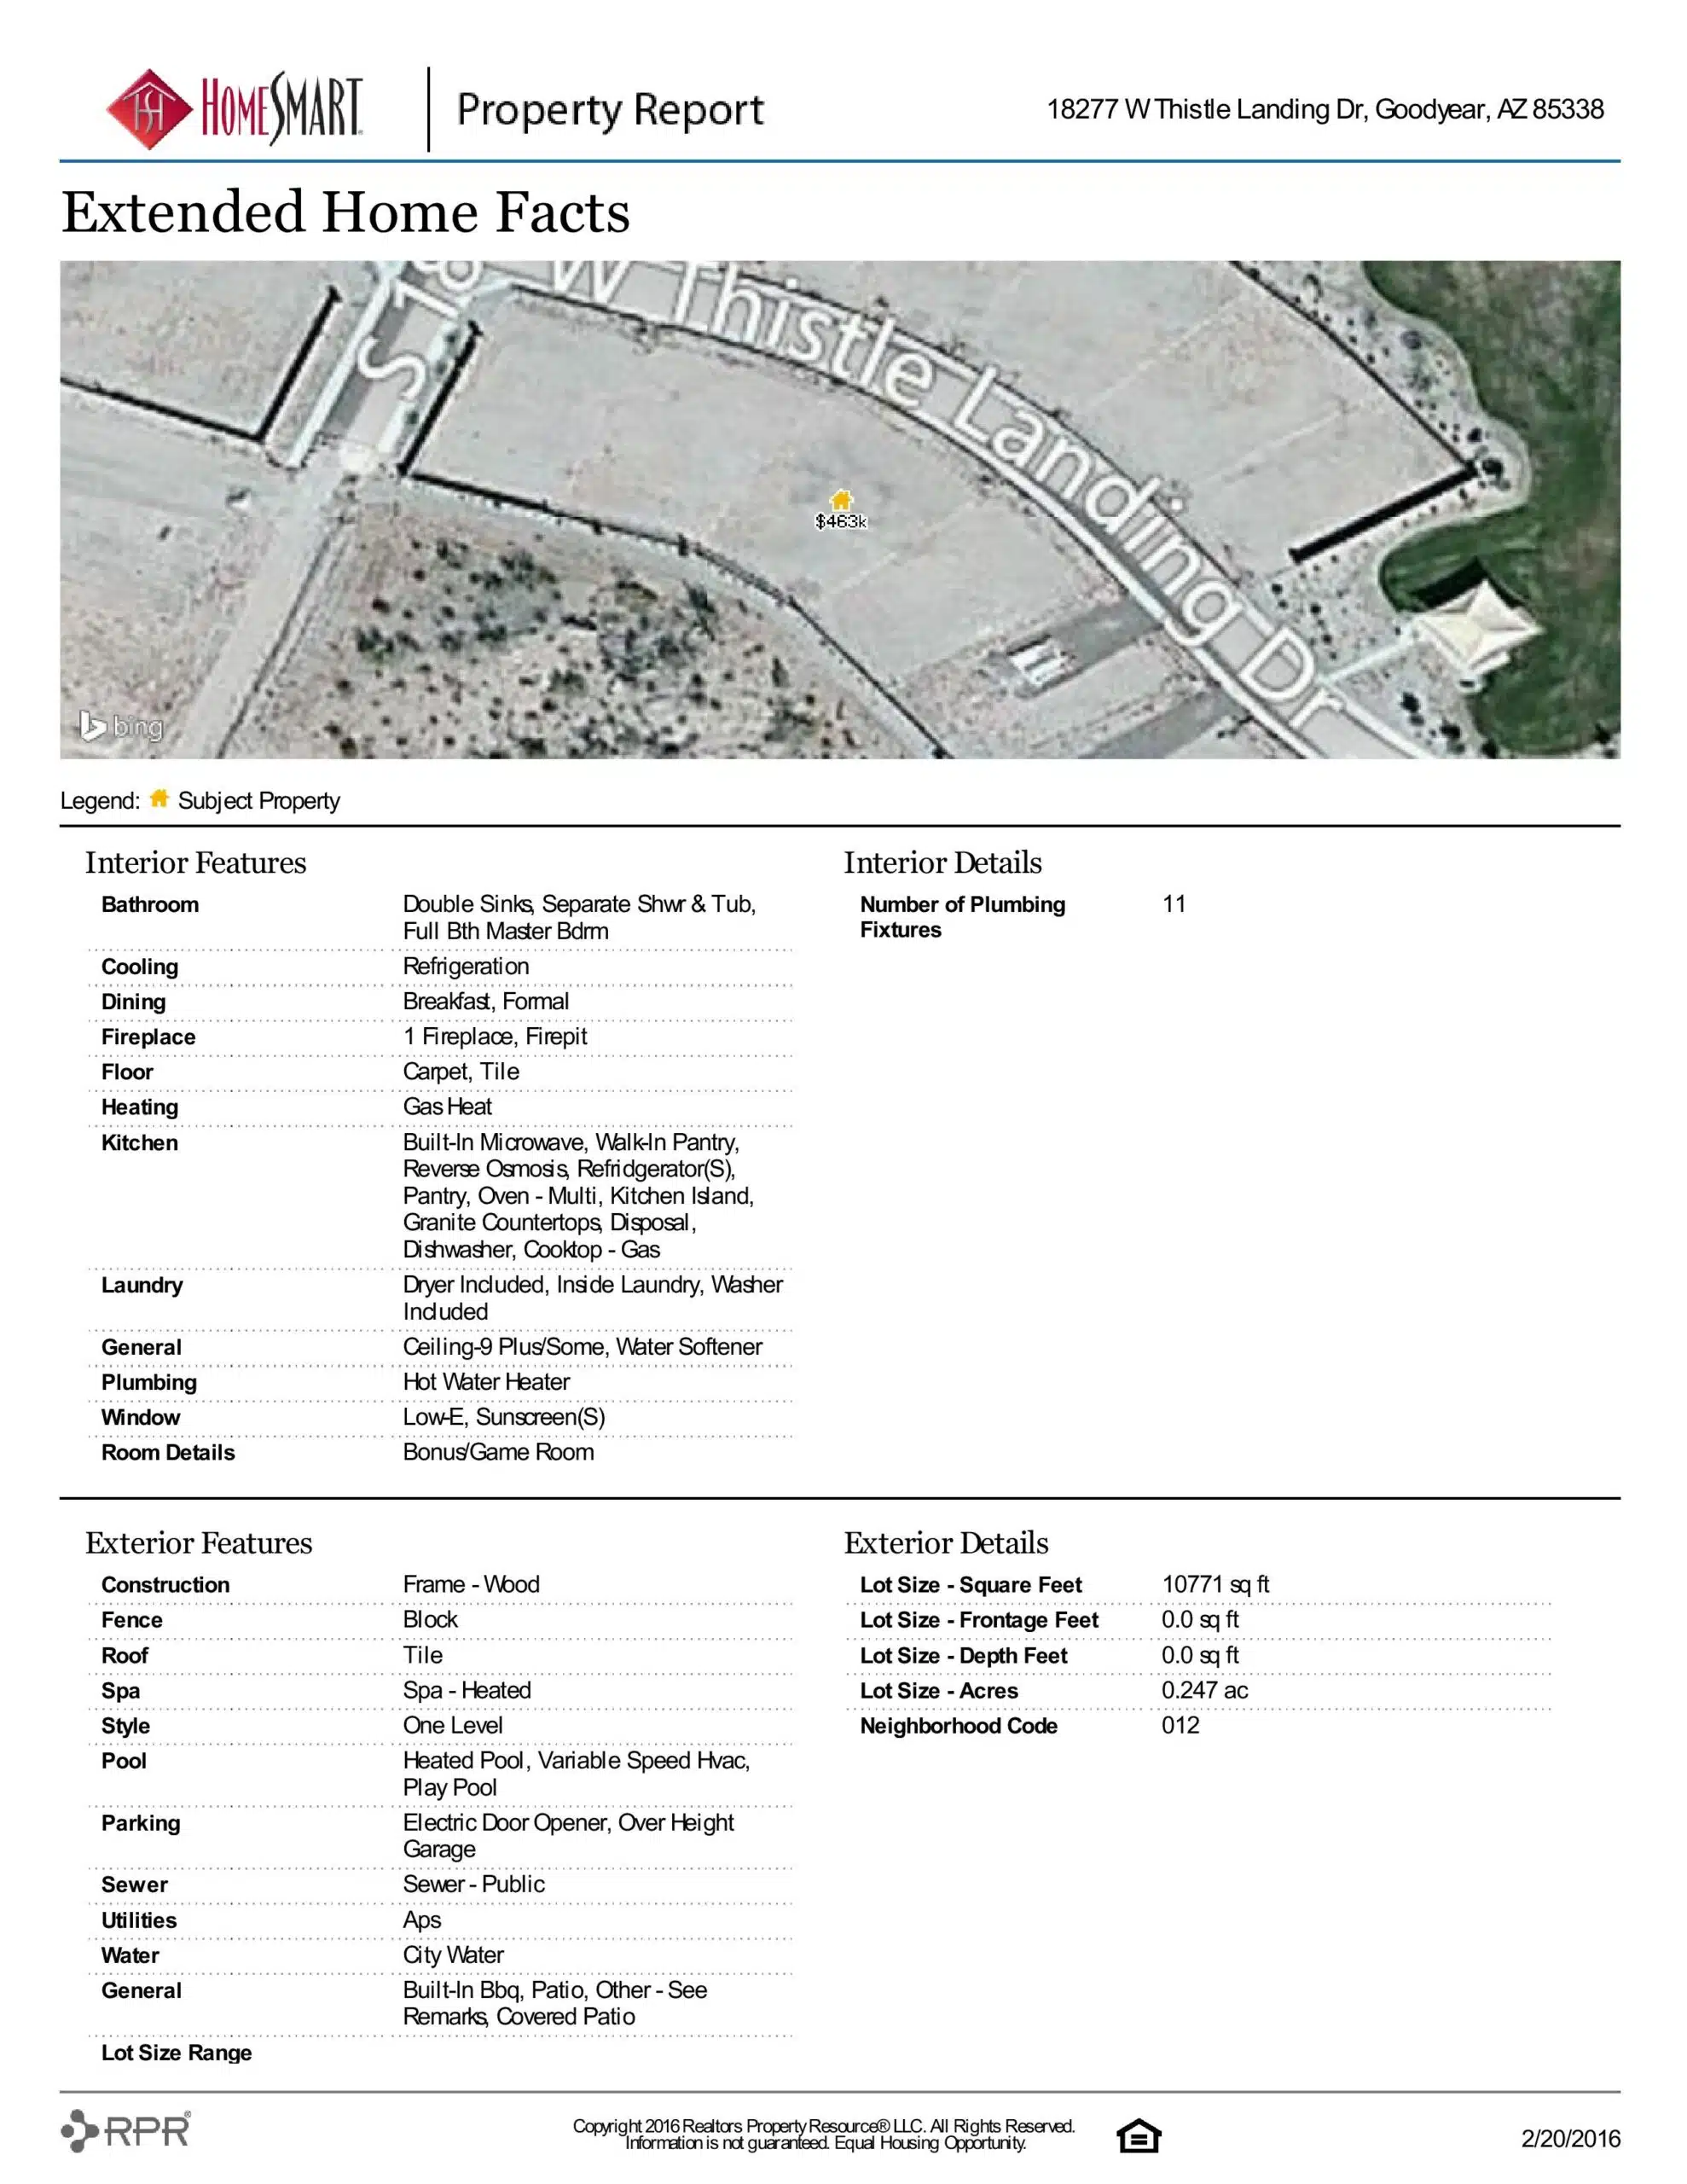 18277 W THISTLE LANDING DR PROPERTY REPORT-page-004